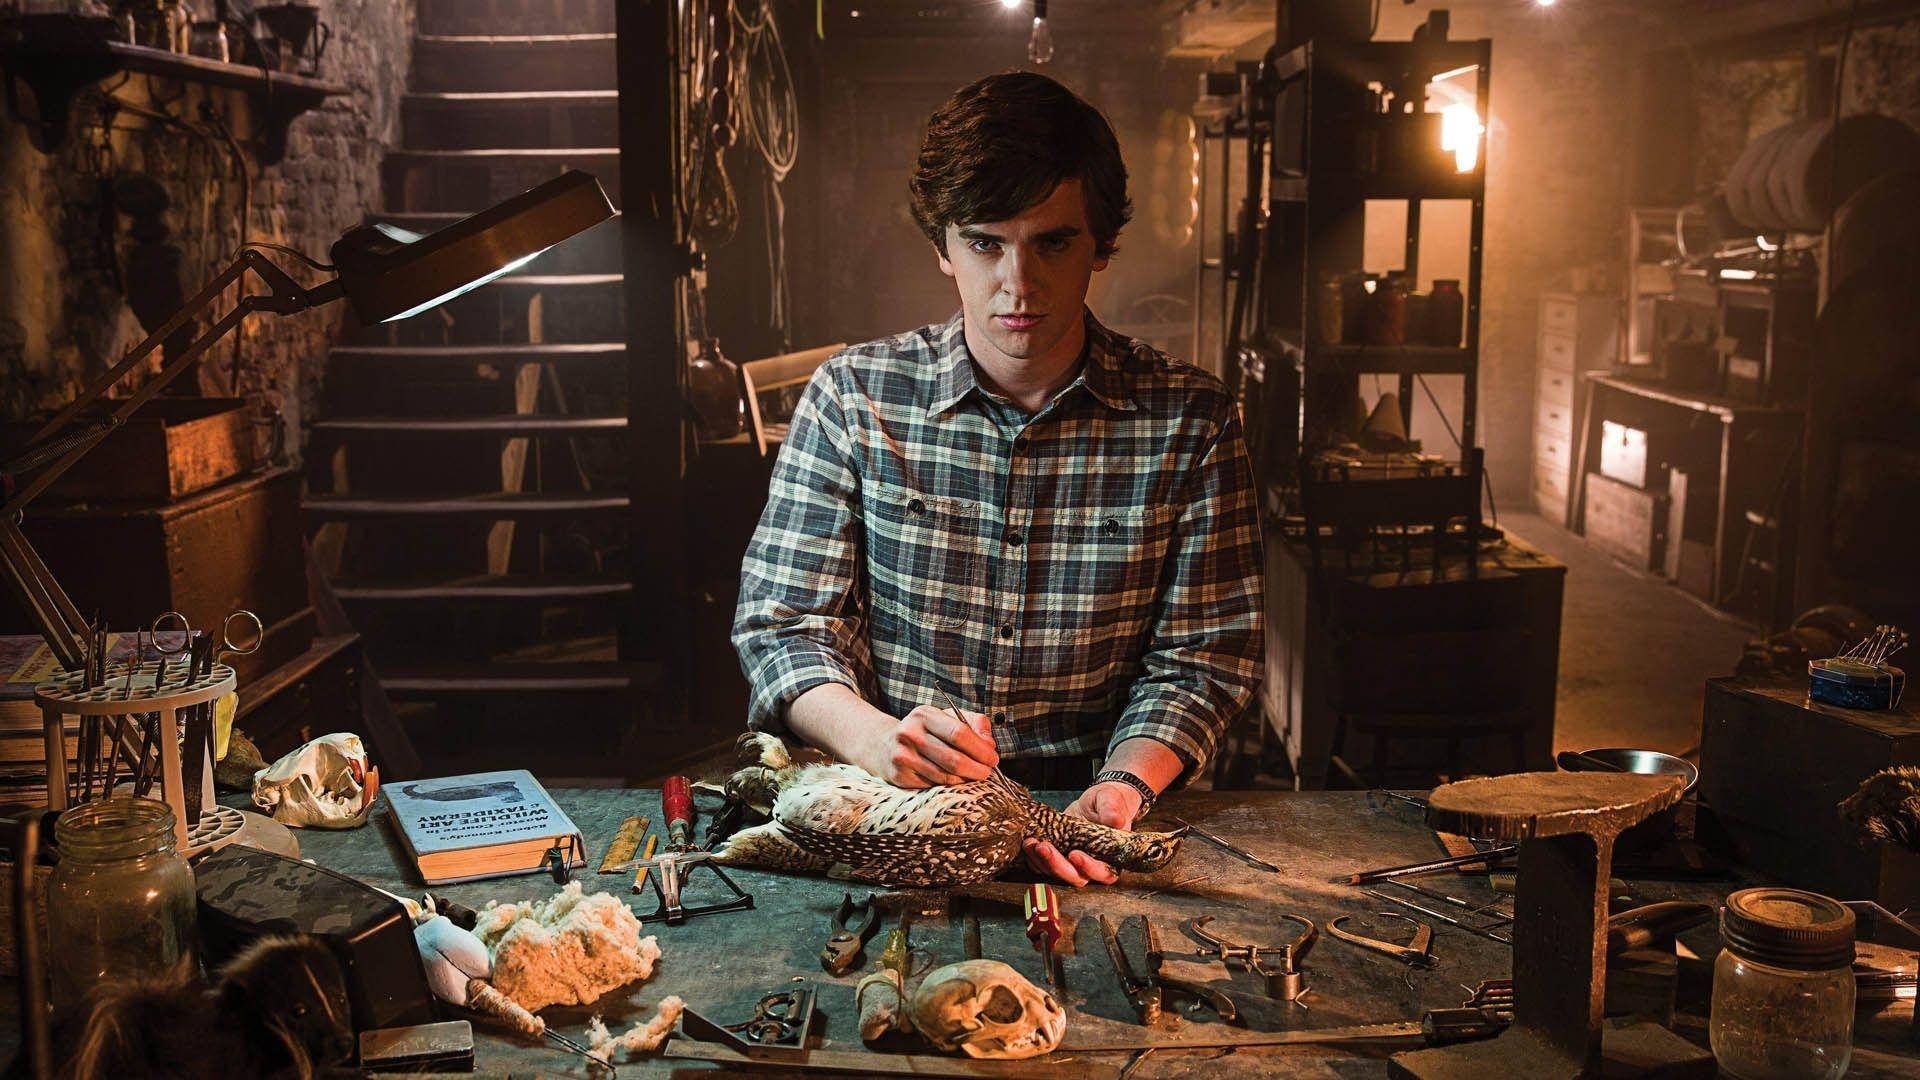 Emotional Scene from Bates Motel featuring Norman Bates Wallpaper